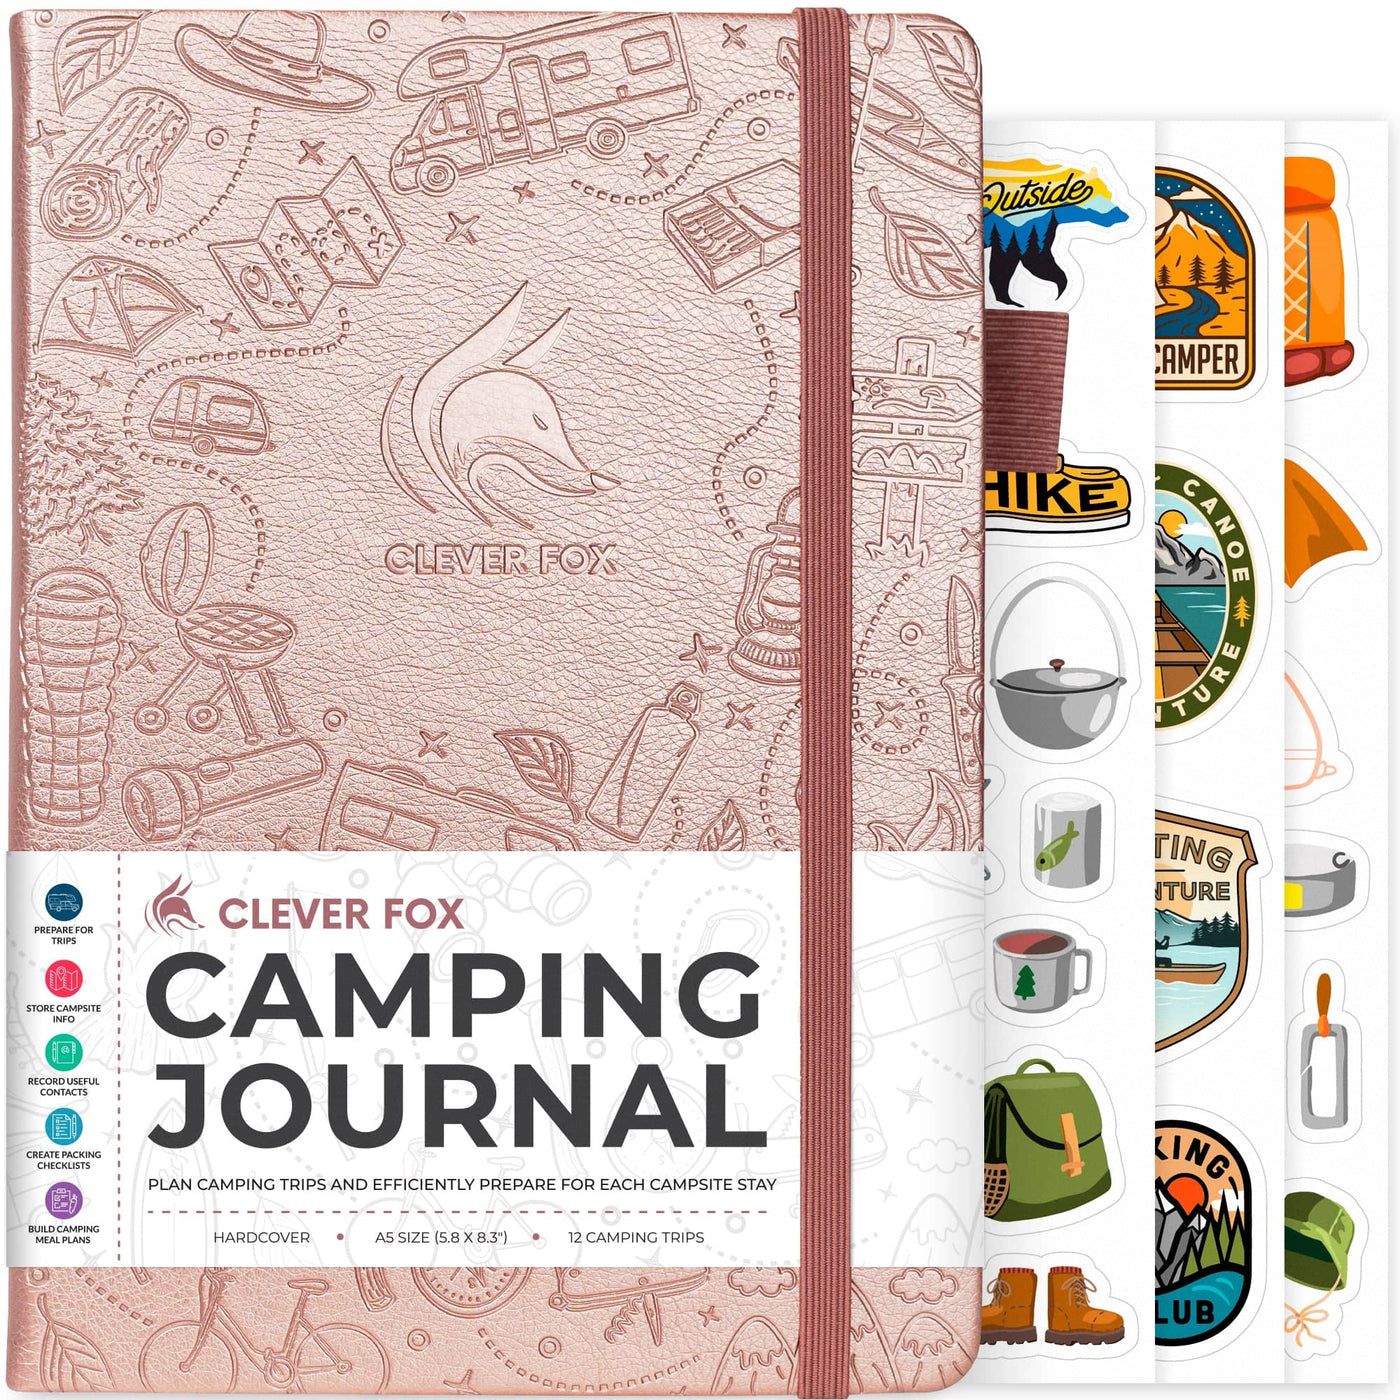 Clever Fox Camping Journal 